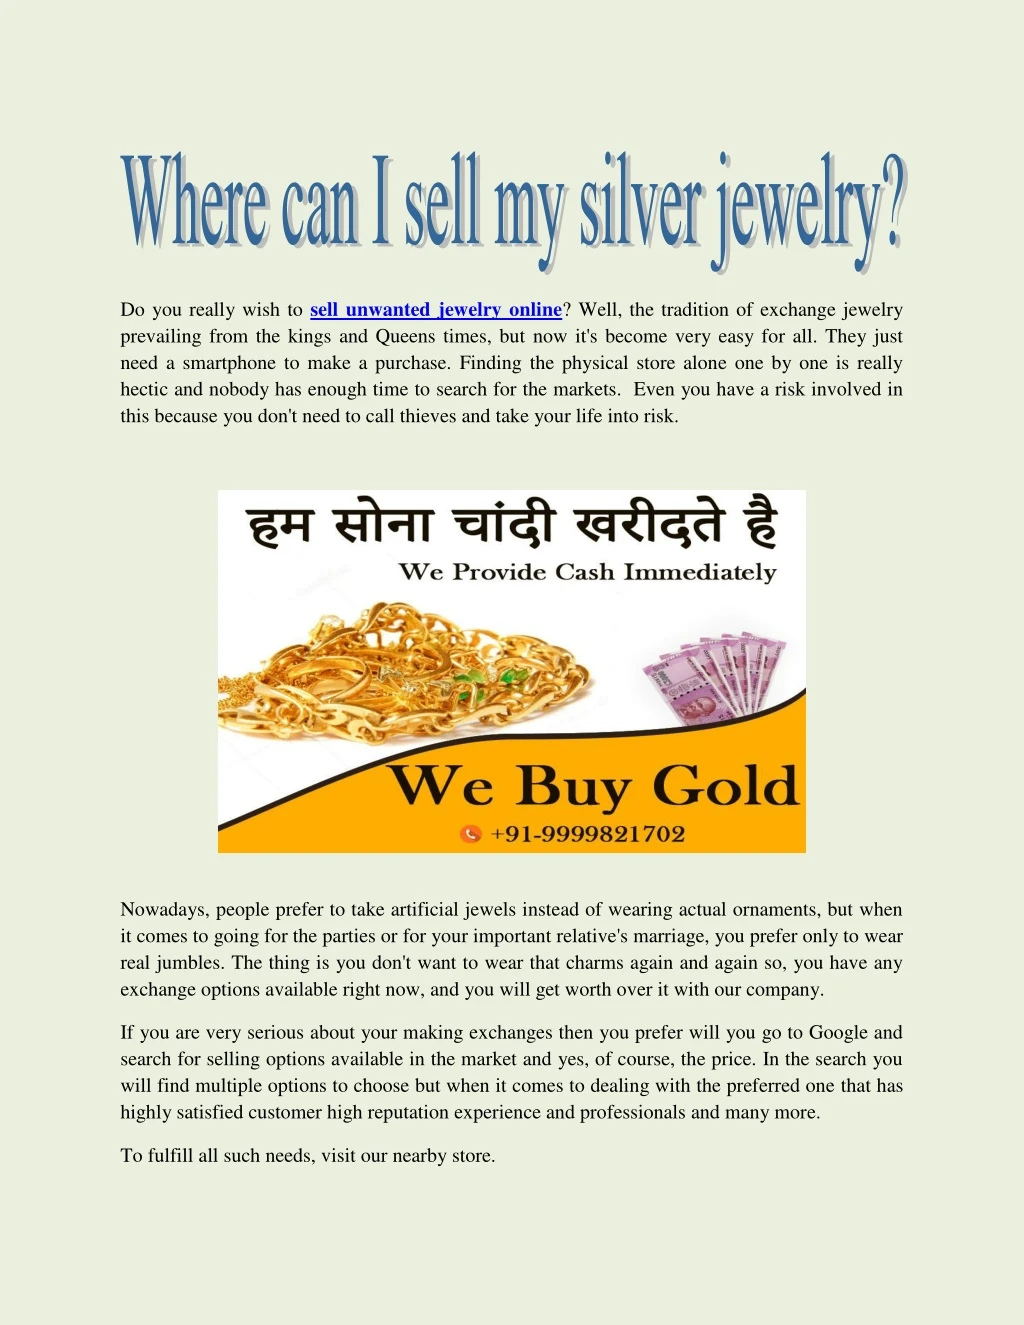 do you really wish to sell unwanted jewelry